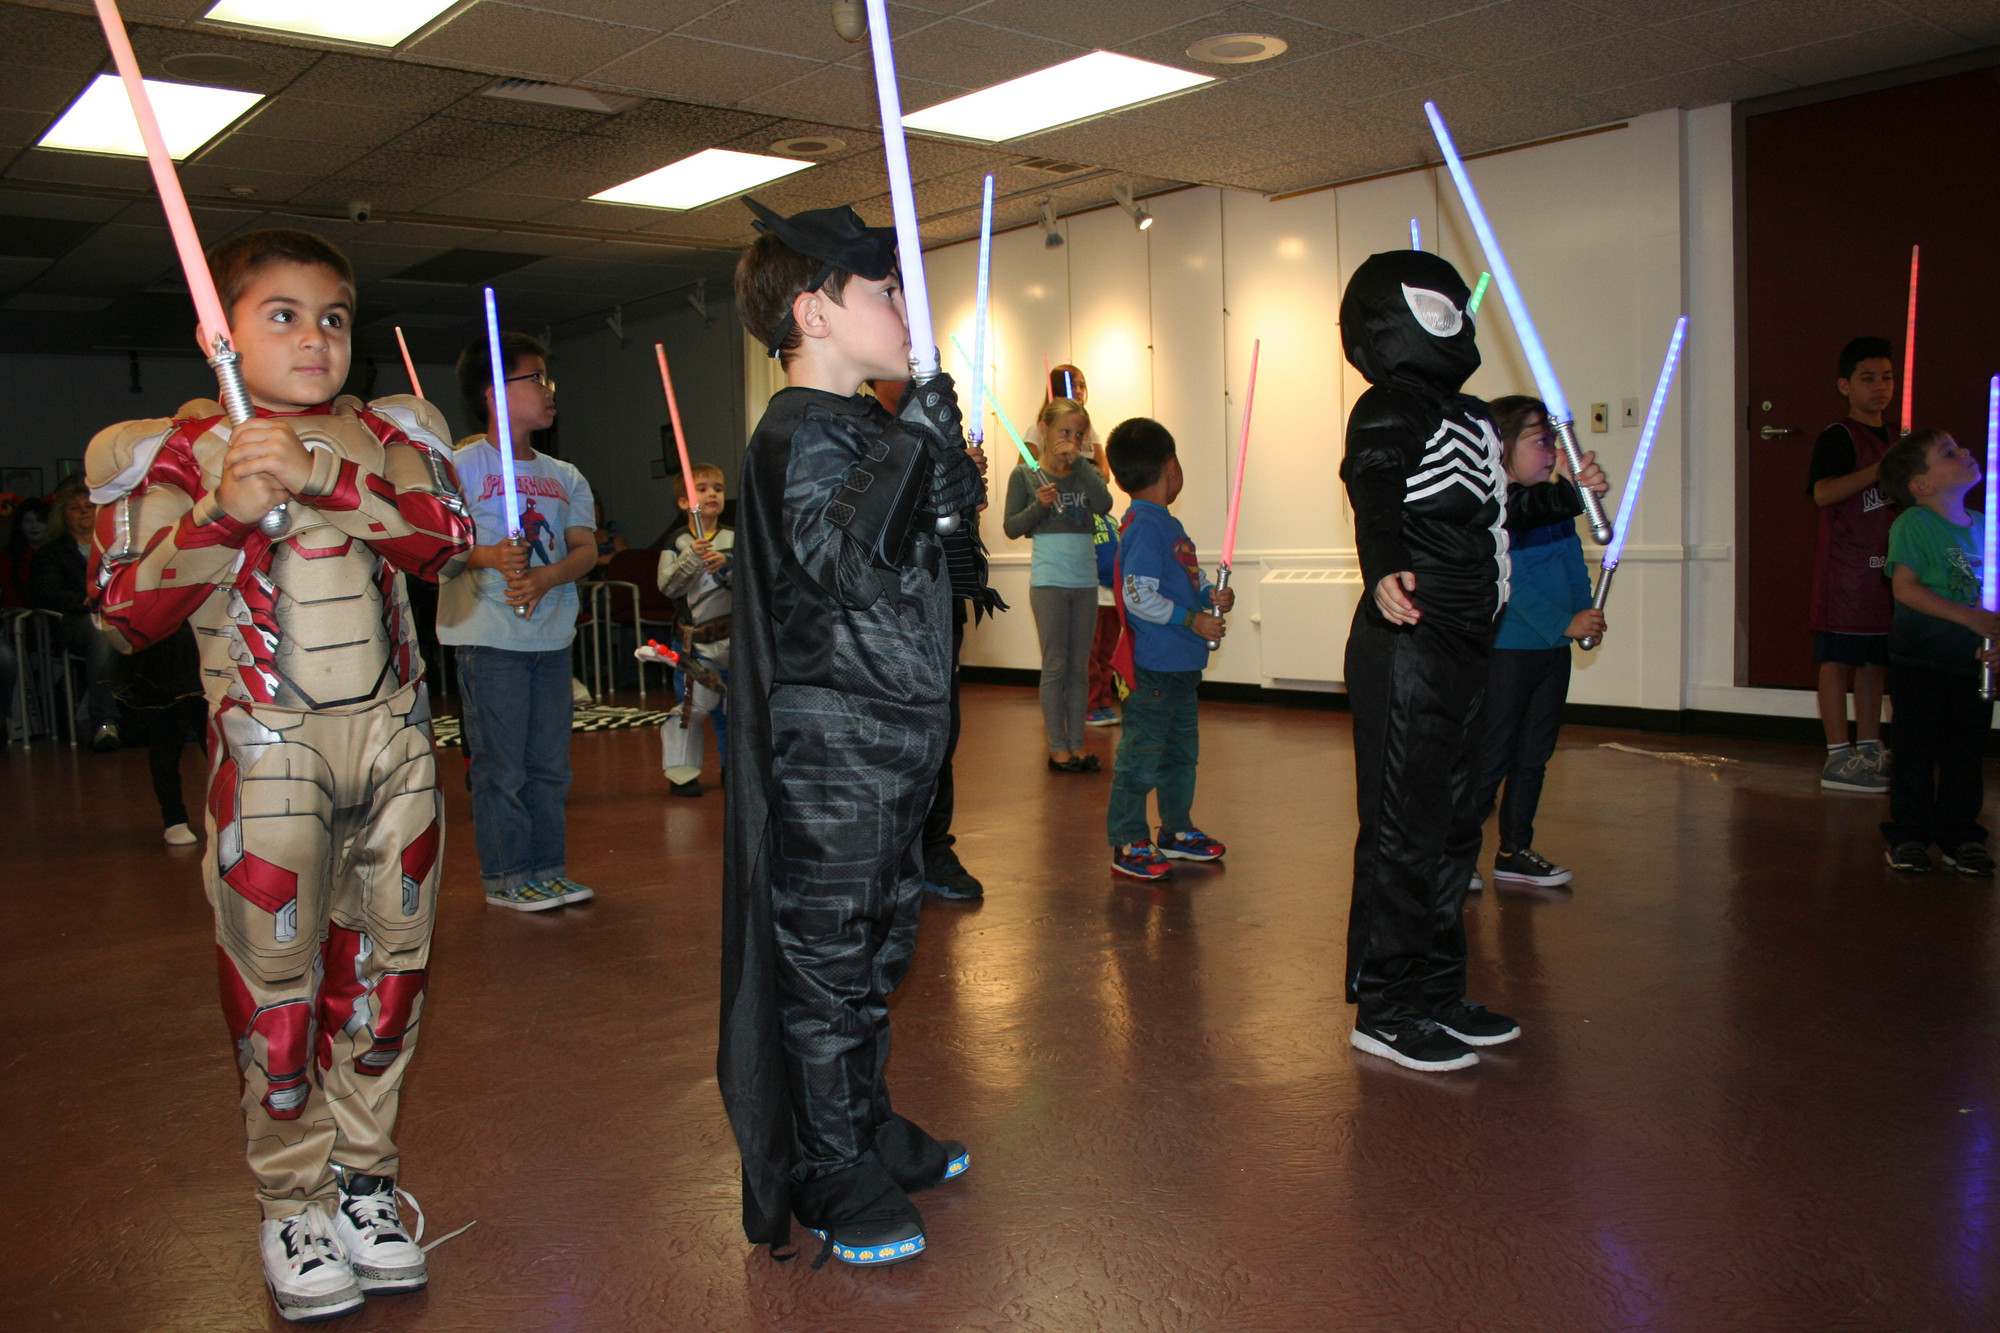 Young Jedis-in-training followed instructions carefully so they could master the art of lightsaber use at a recent special program at the Bellmore Memorial Library.